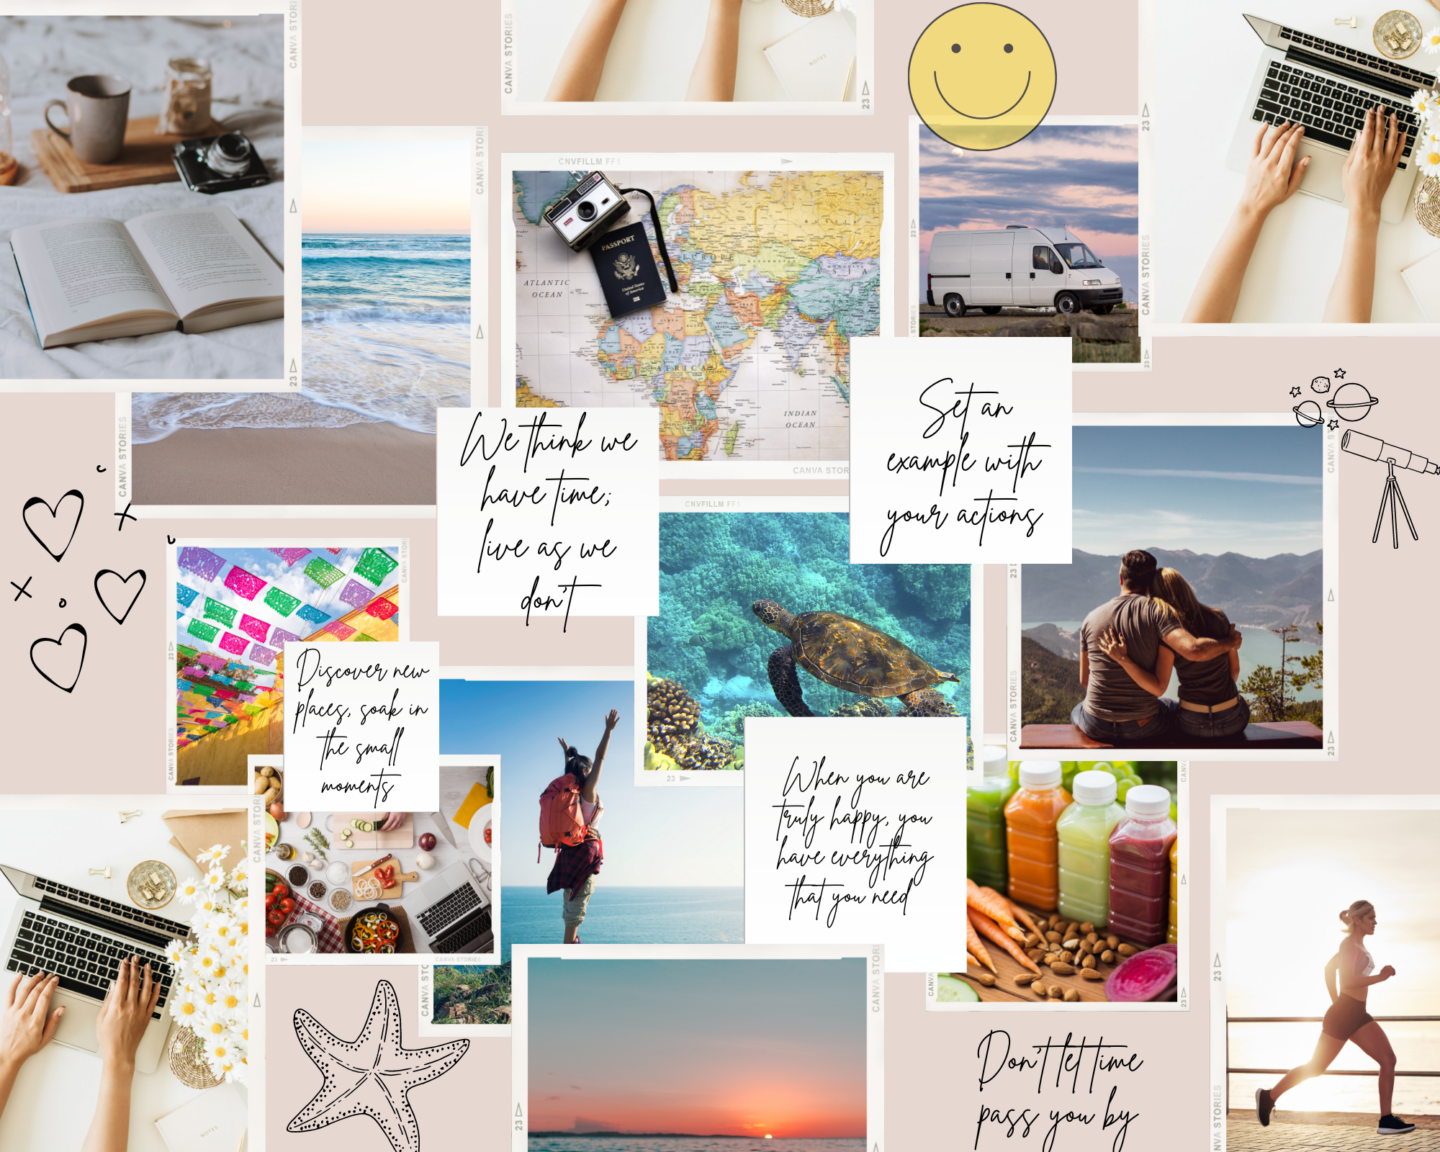 How to Create a Beautiful Digital Vision Board: No Magazines